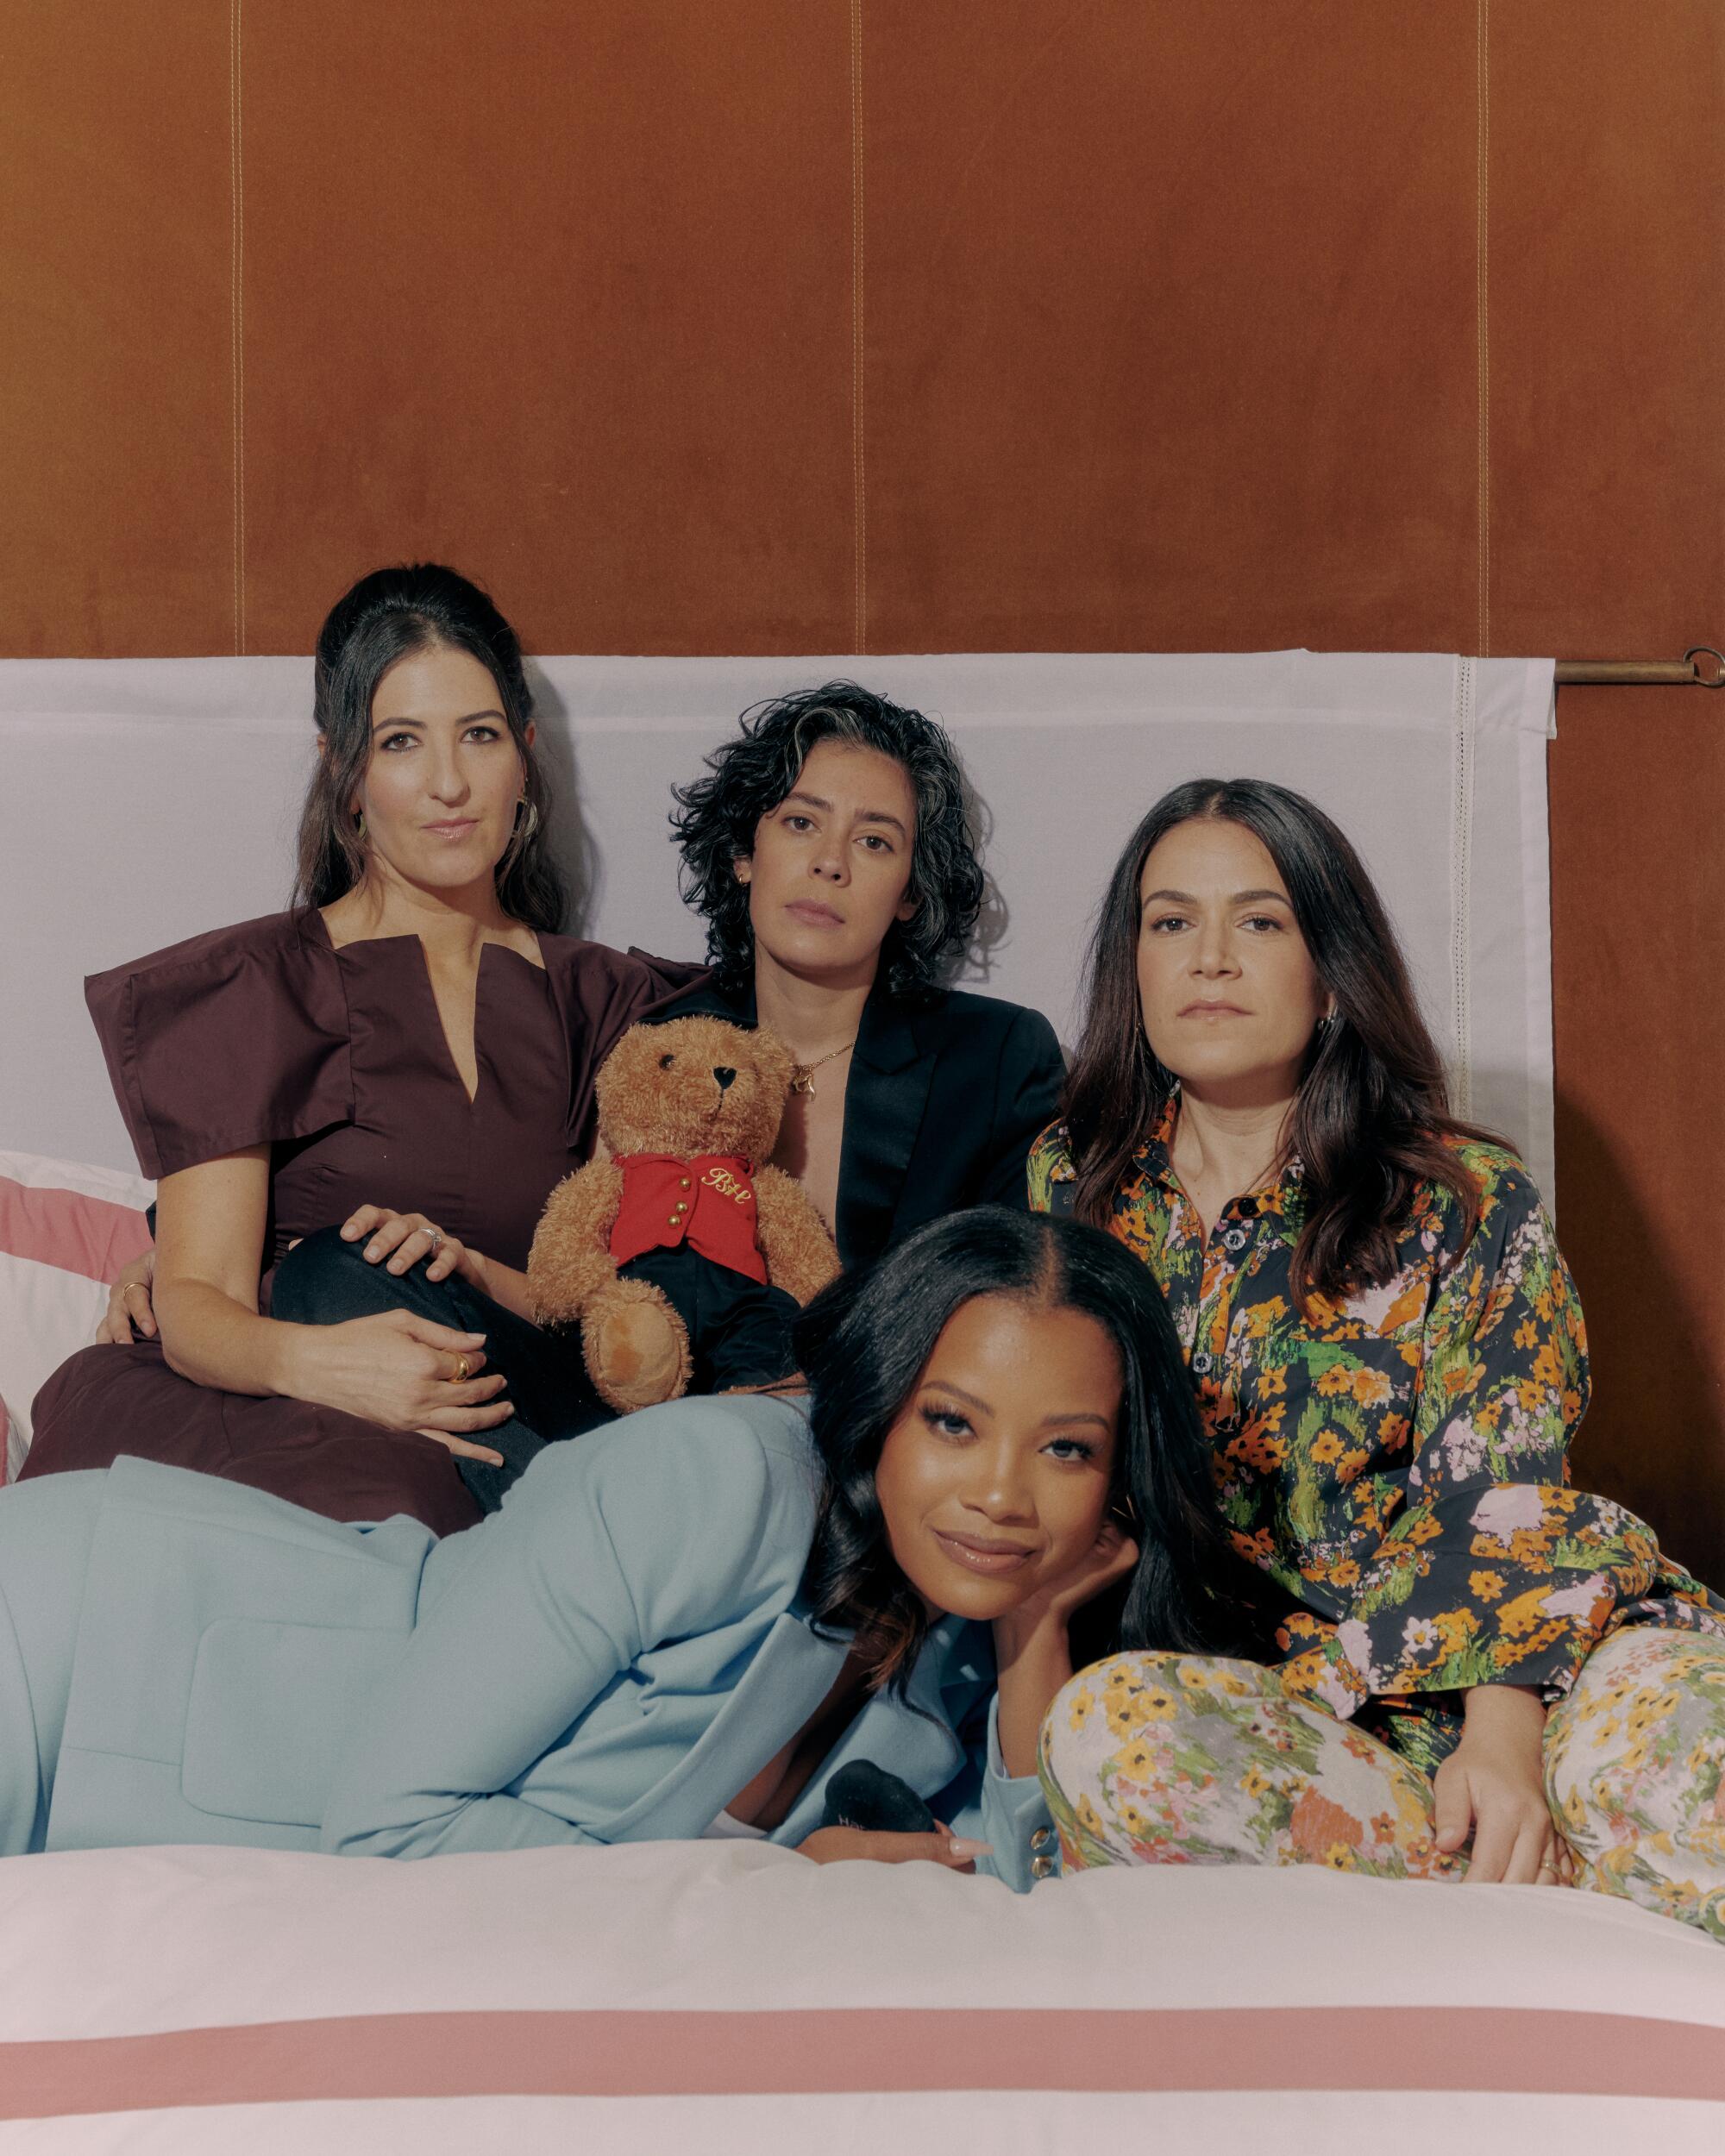 Four women on a bed